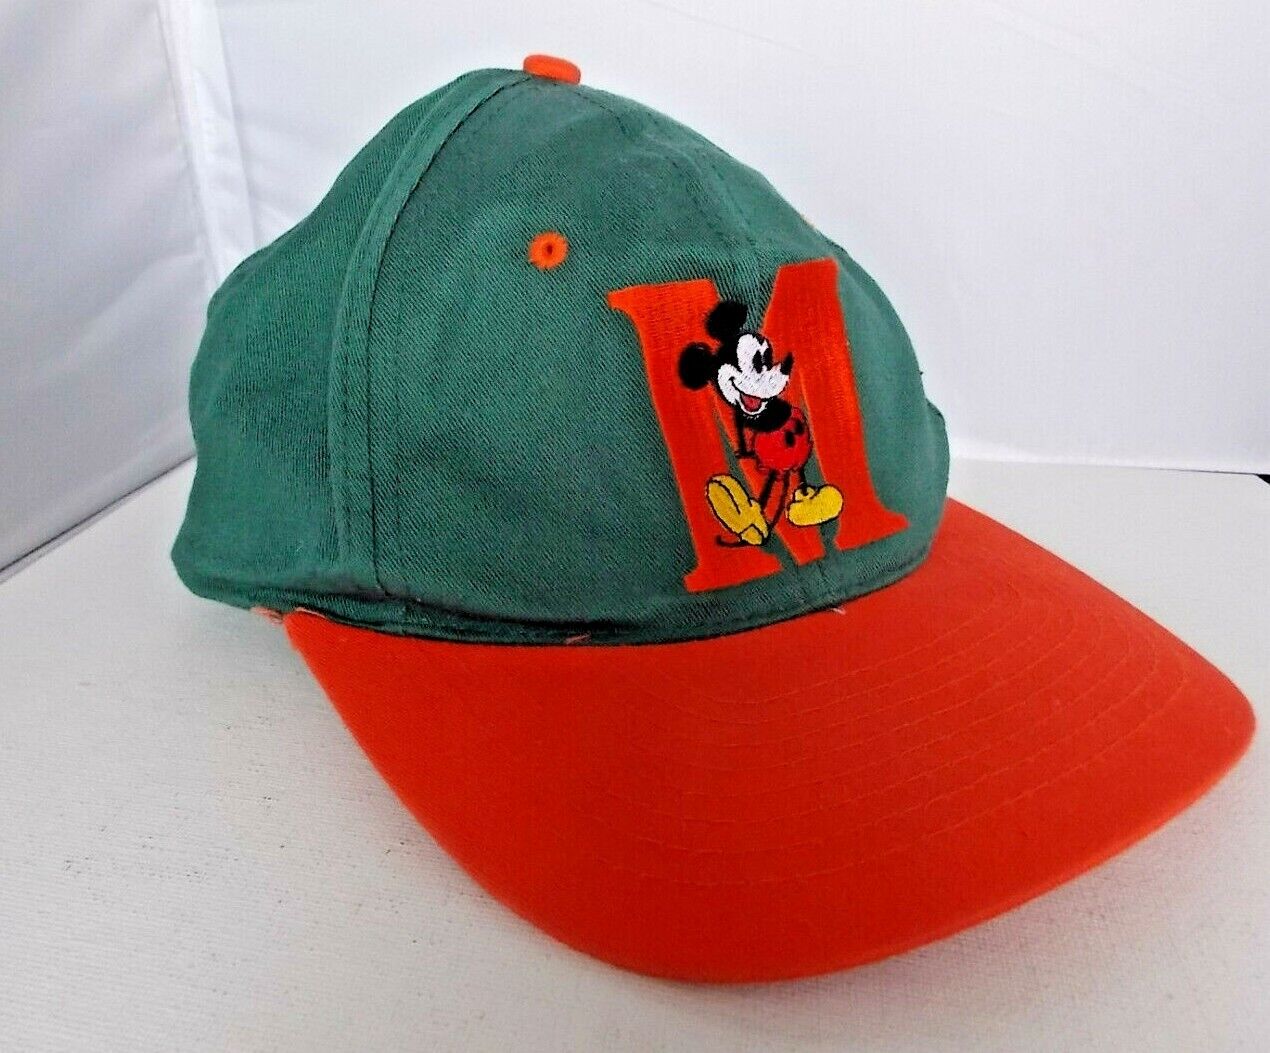 Vintage Fresh Caps Mickey Mouse Hat Cap Green Orange Snap Back One Size